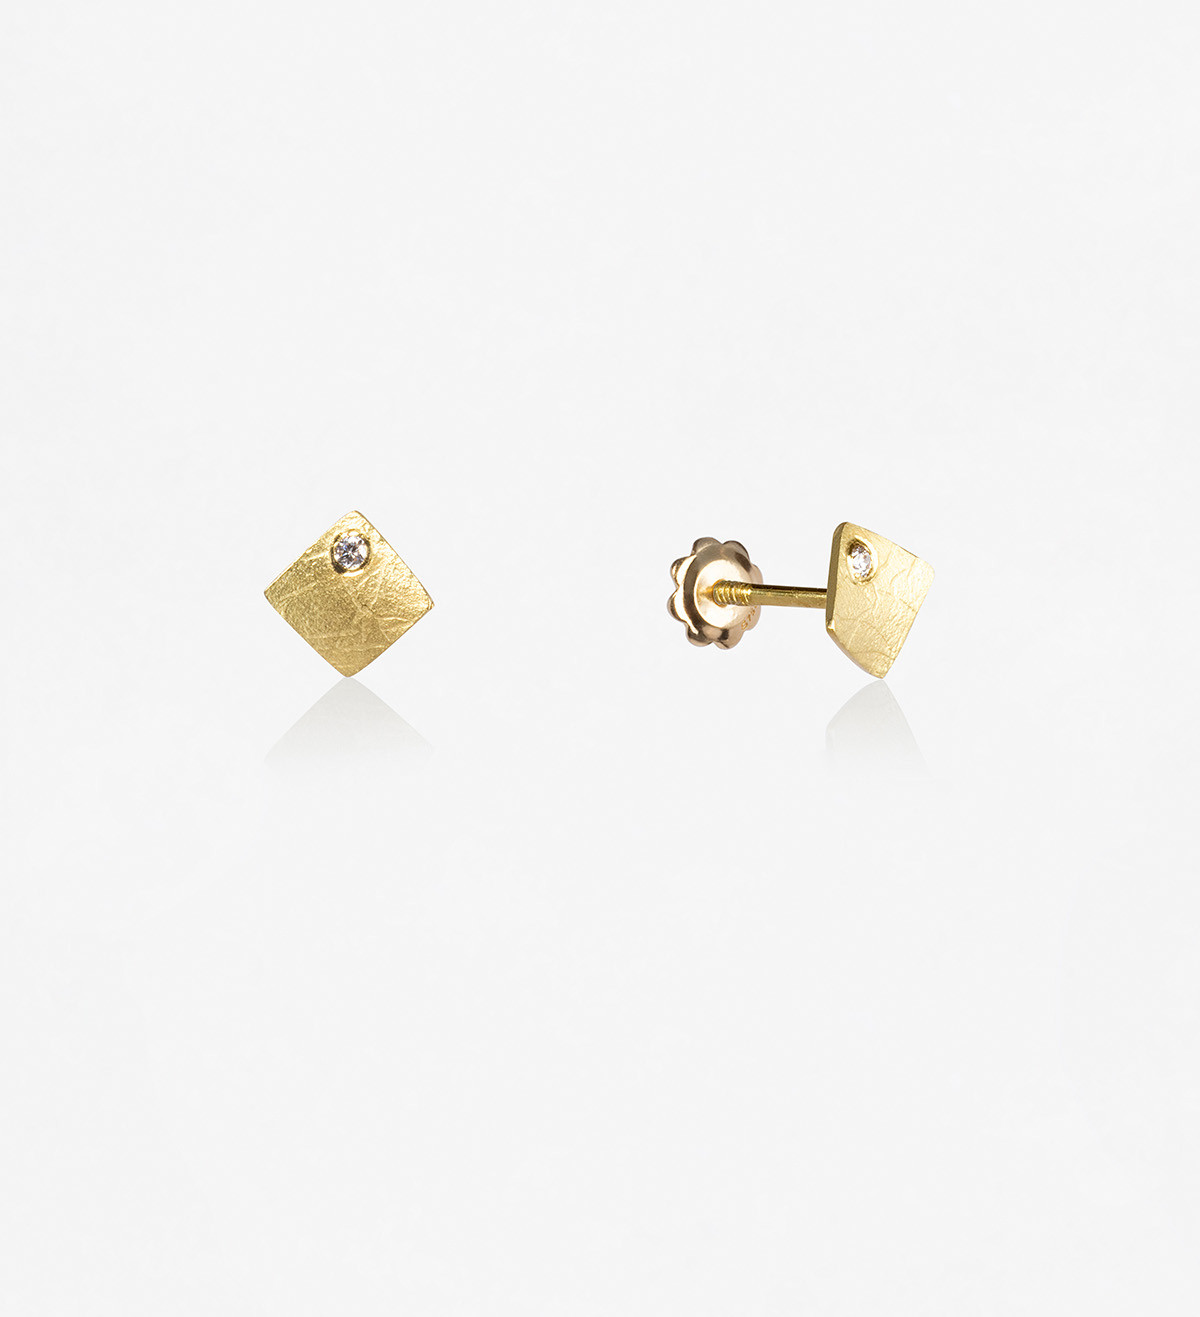 18k gold earrings Ones 4mm with diamonds 0,014ct